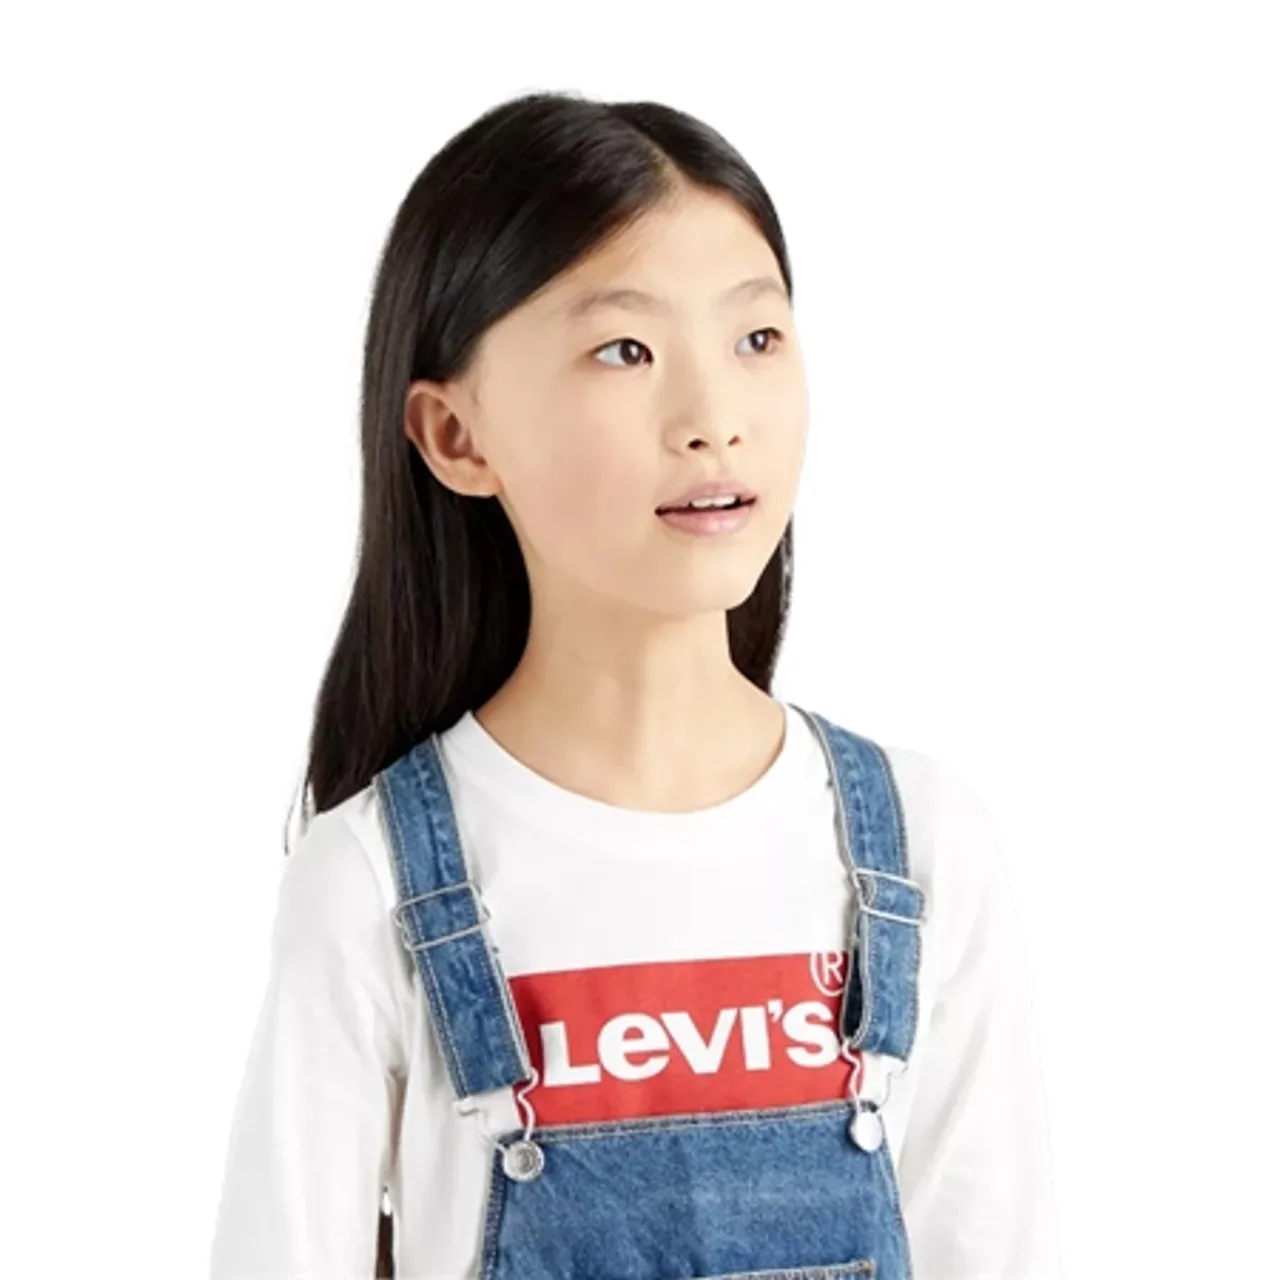 Levi's® Girls Railroad Dungarees Shorts - Low Down